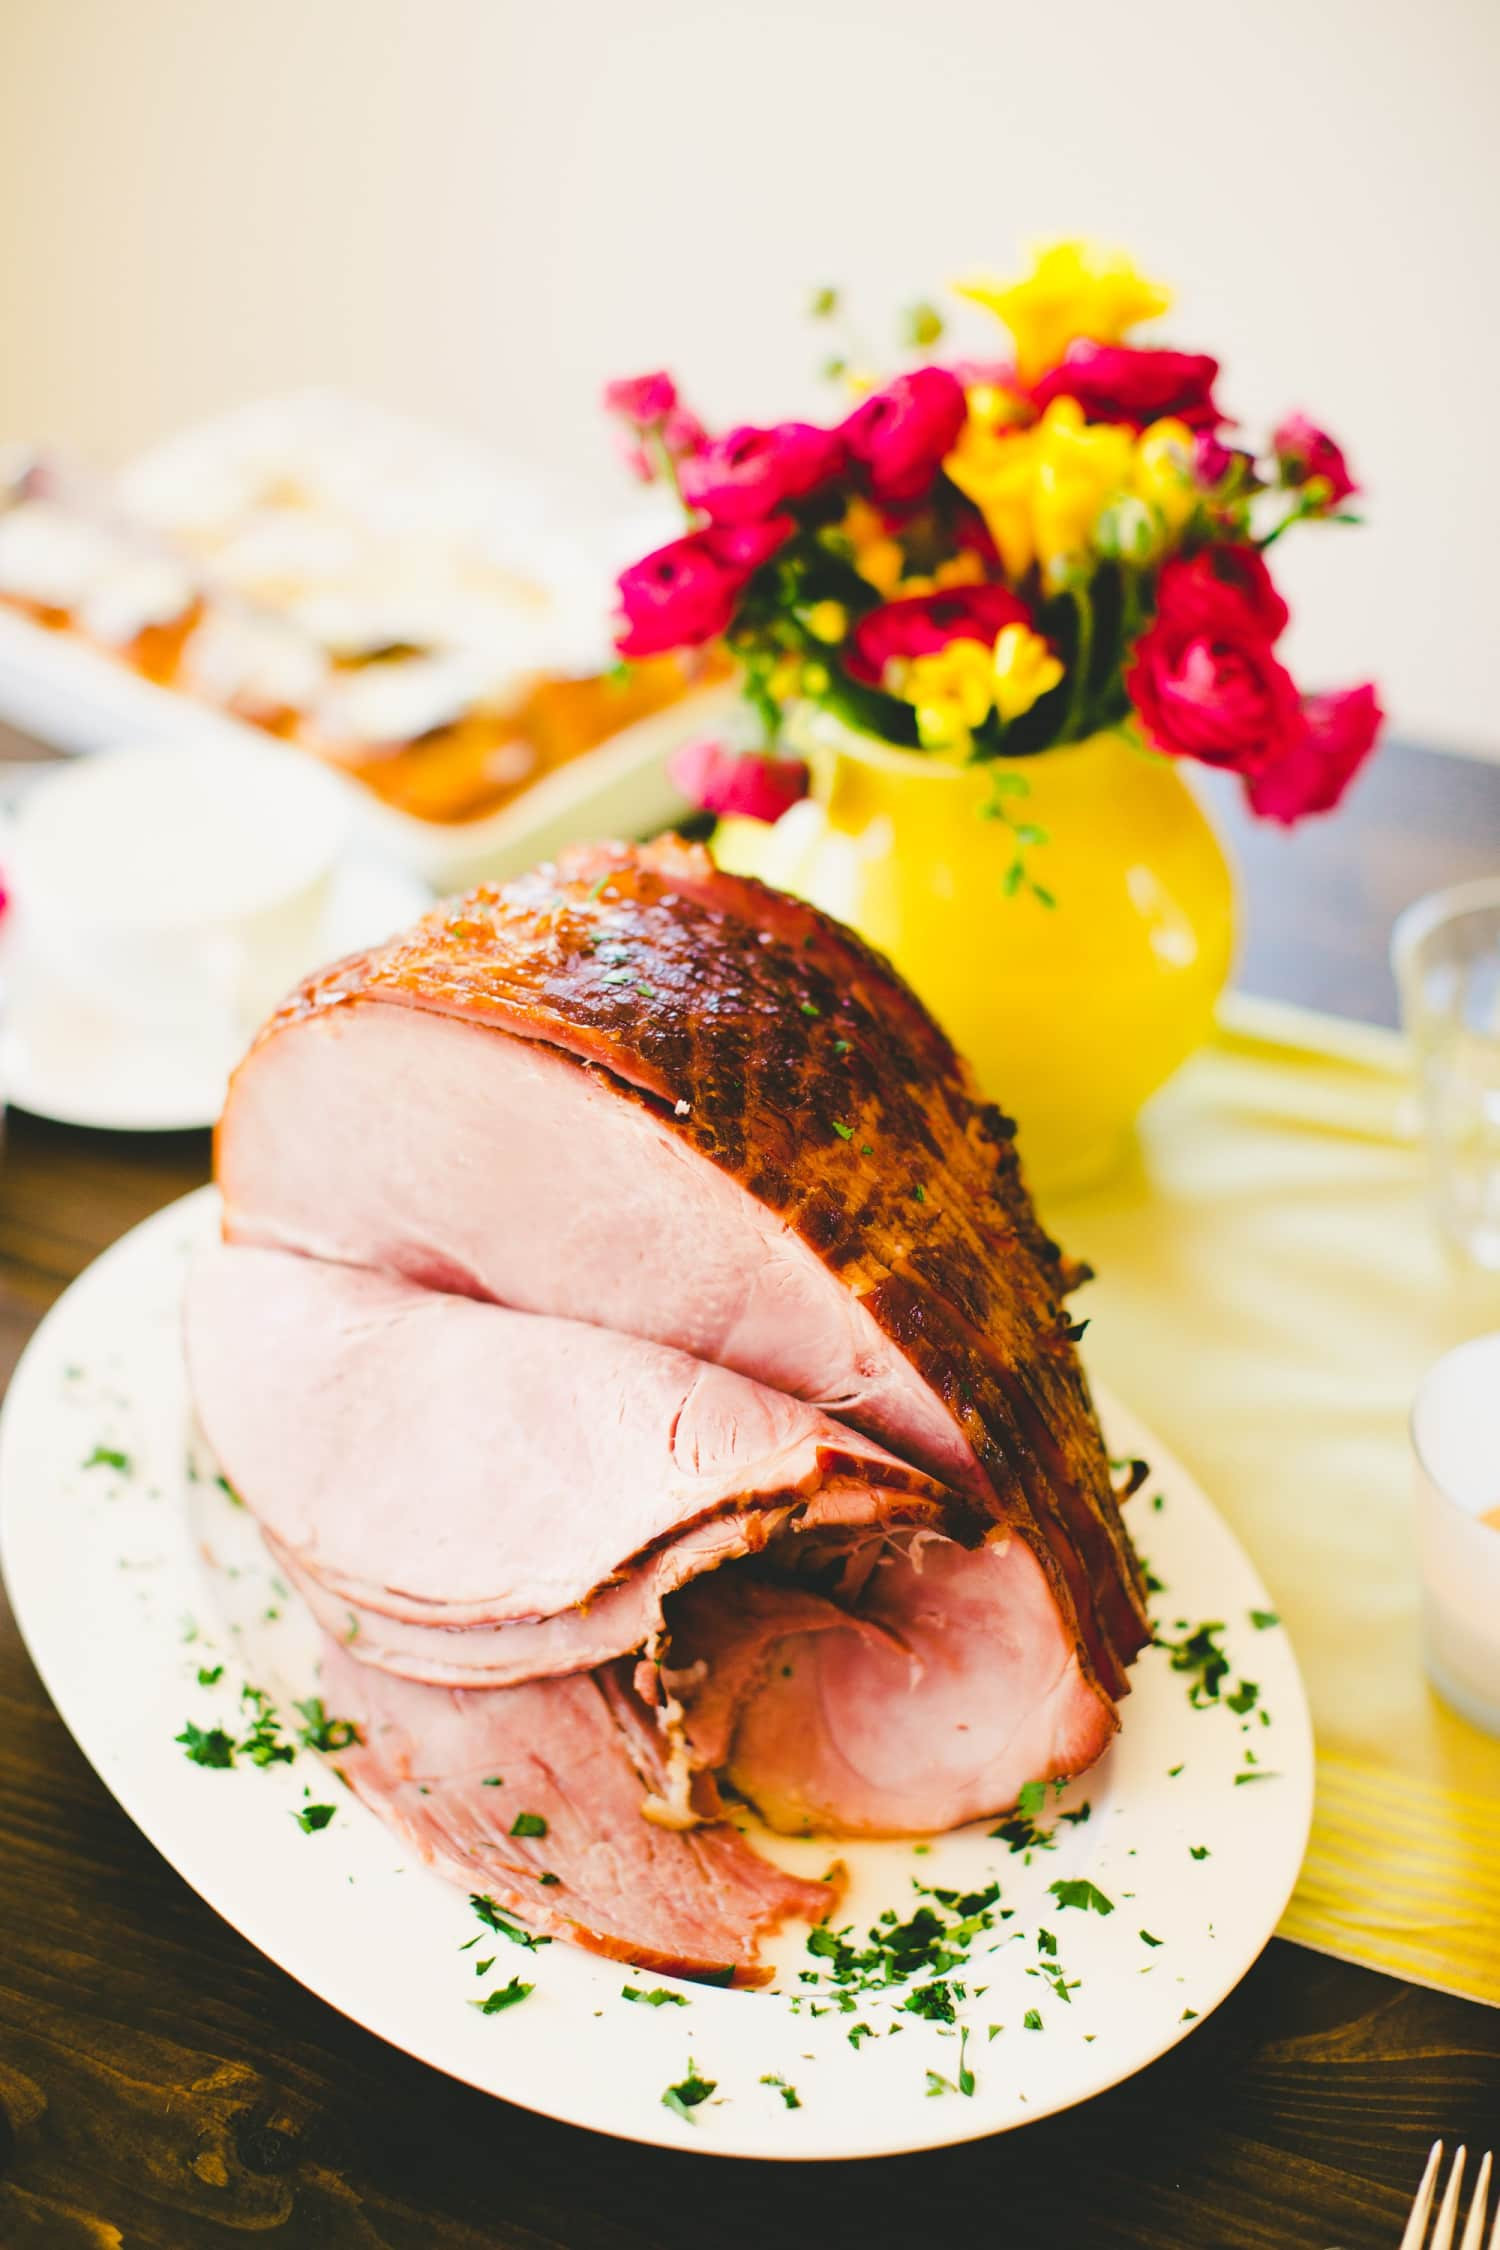 Baking Easter Ham
 6 Important Things to Know About Cooking Easter Ham